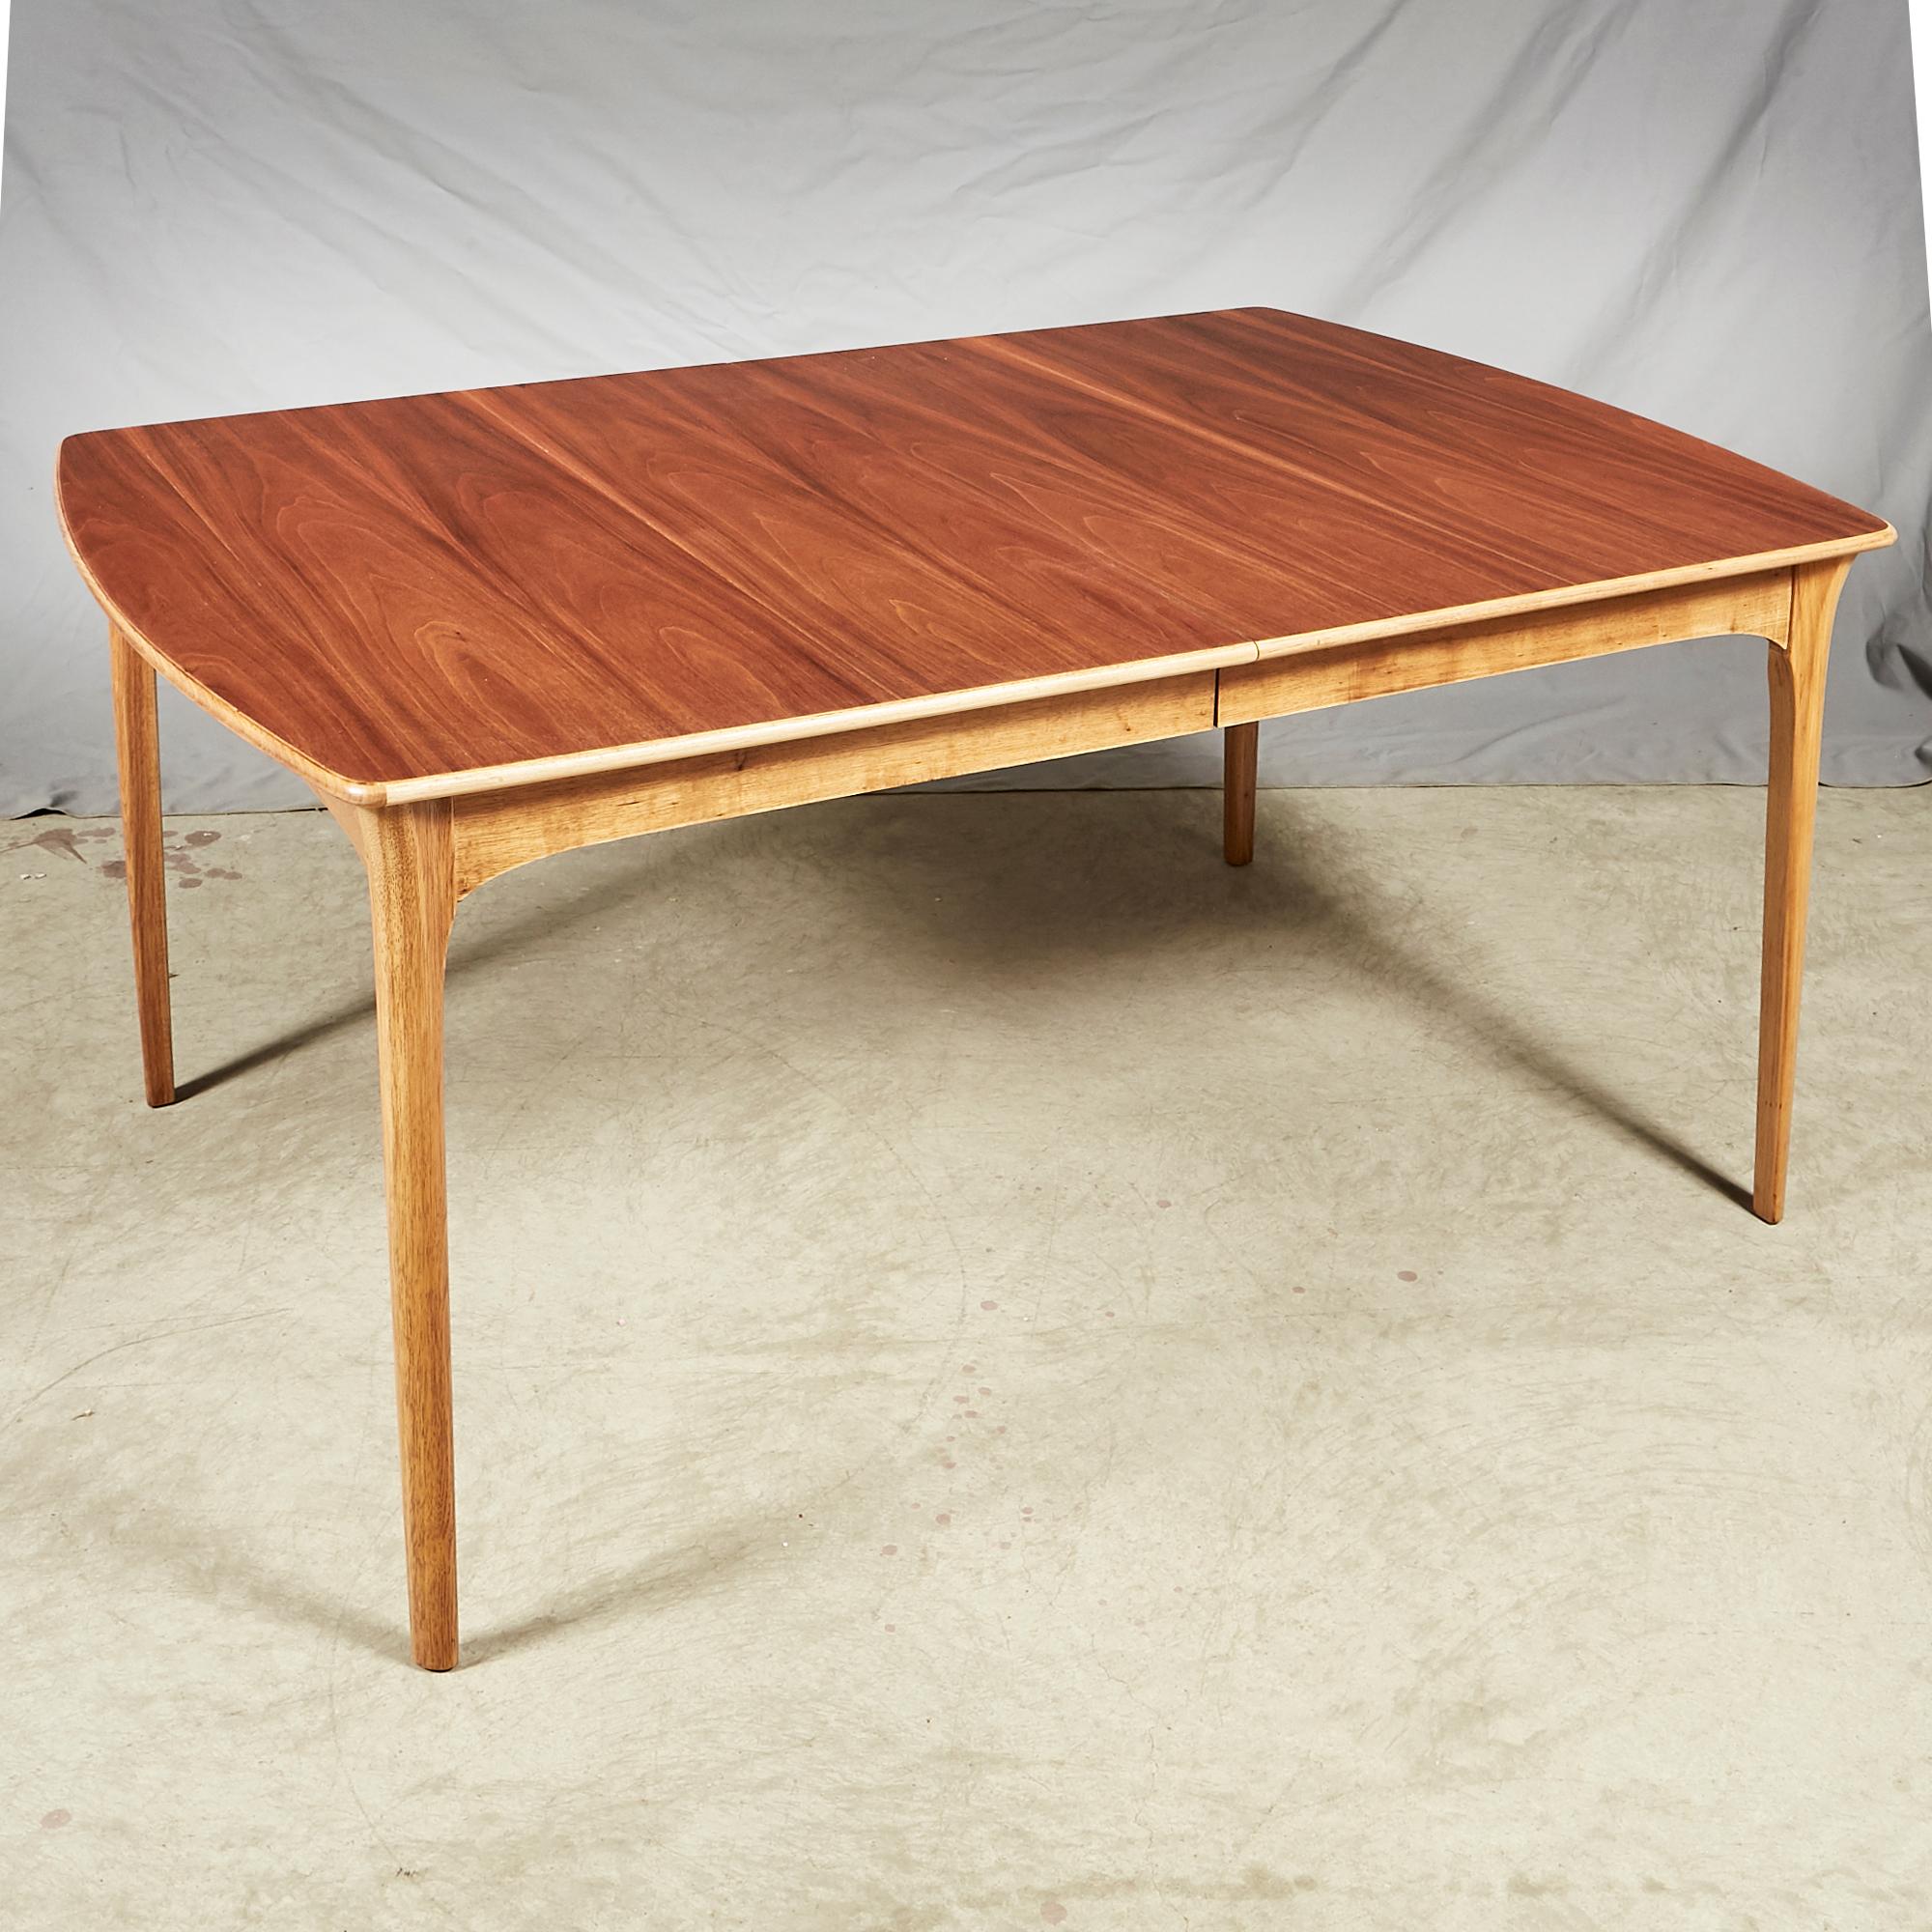 1960s Walnut Wood Dining Room Table In Excellent Condition For Sale In Amherst, NH